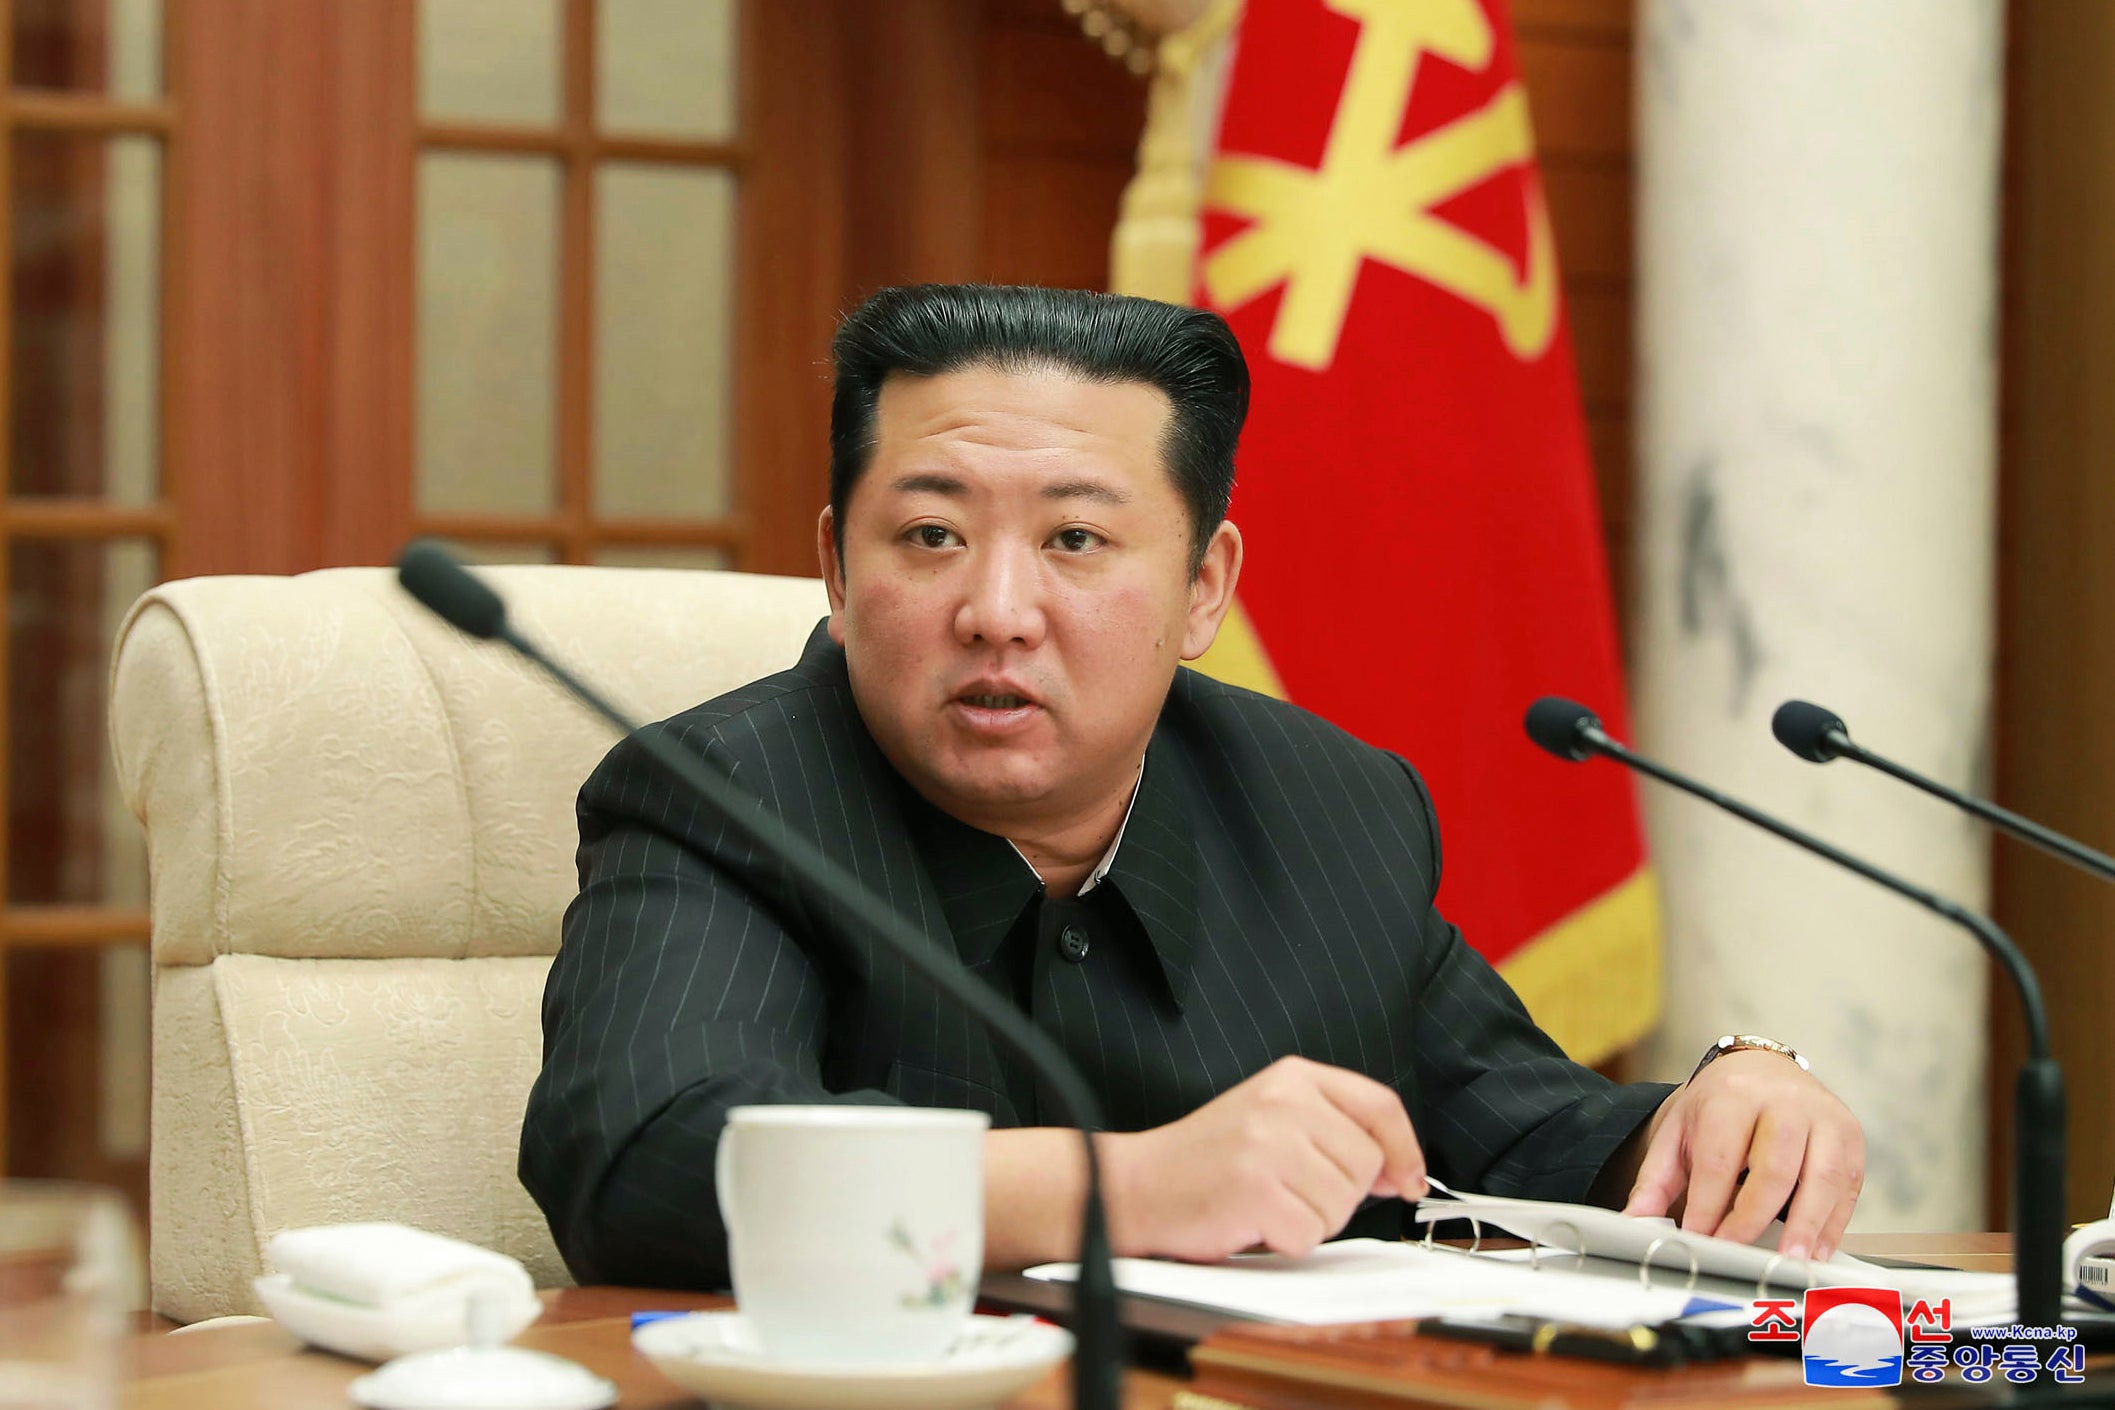 Kim Jong-un attends a ruling party meeting in January